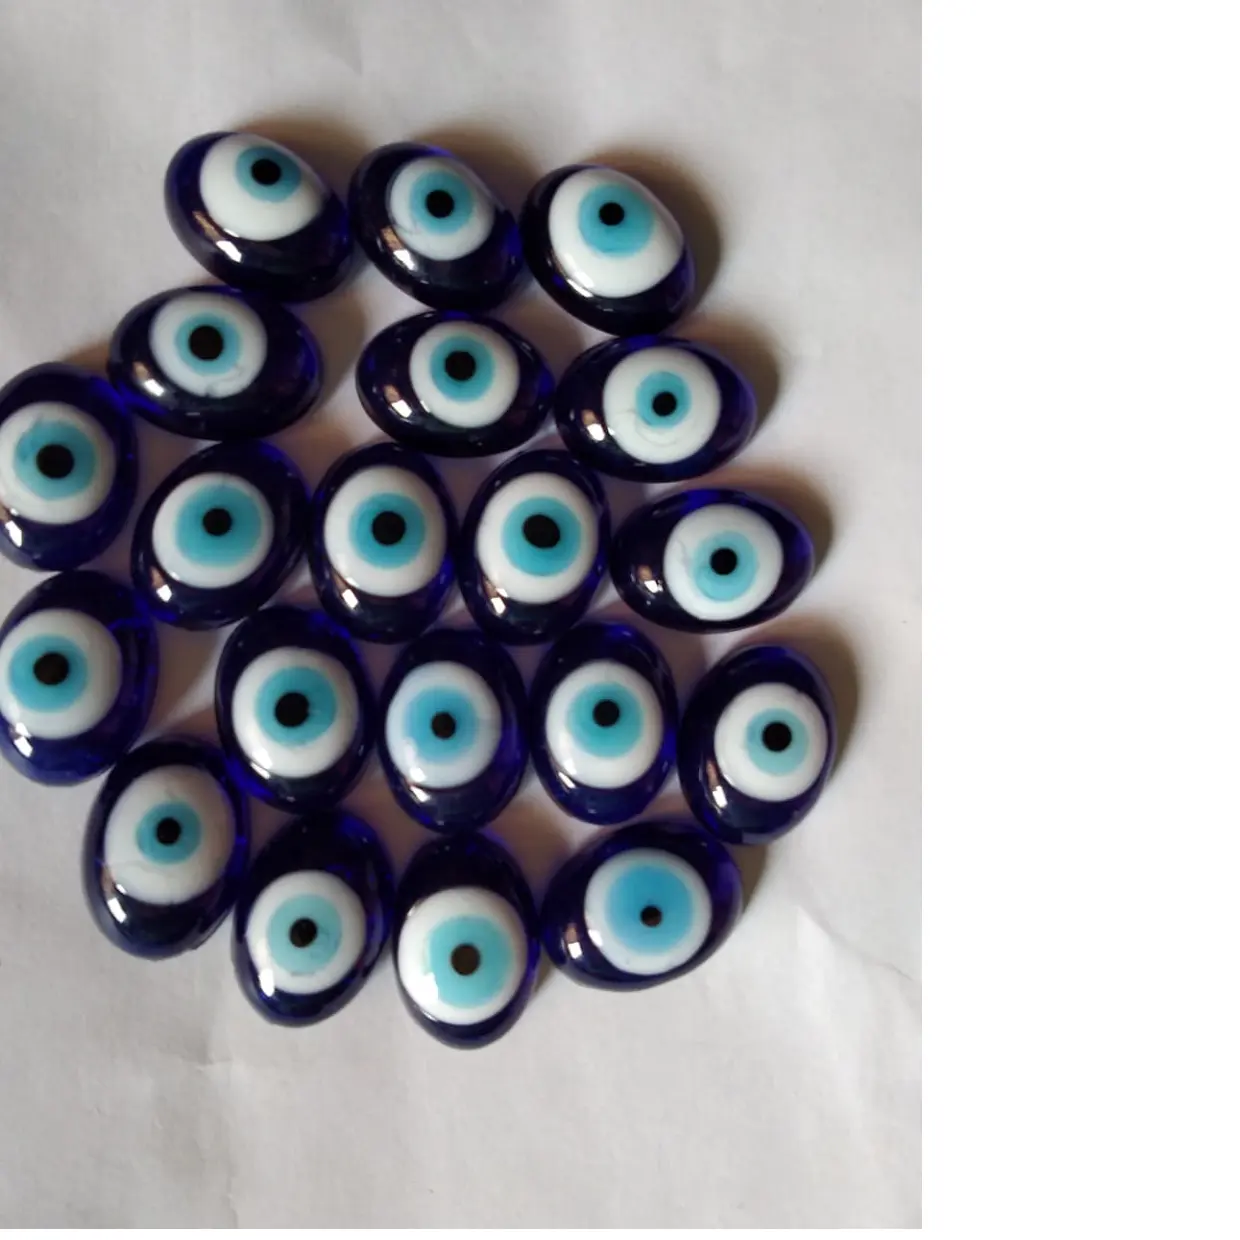 custom made evil eye glass beads in a huge assortment of sizes for jewelry designers and bead stores